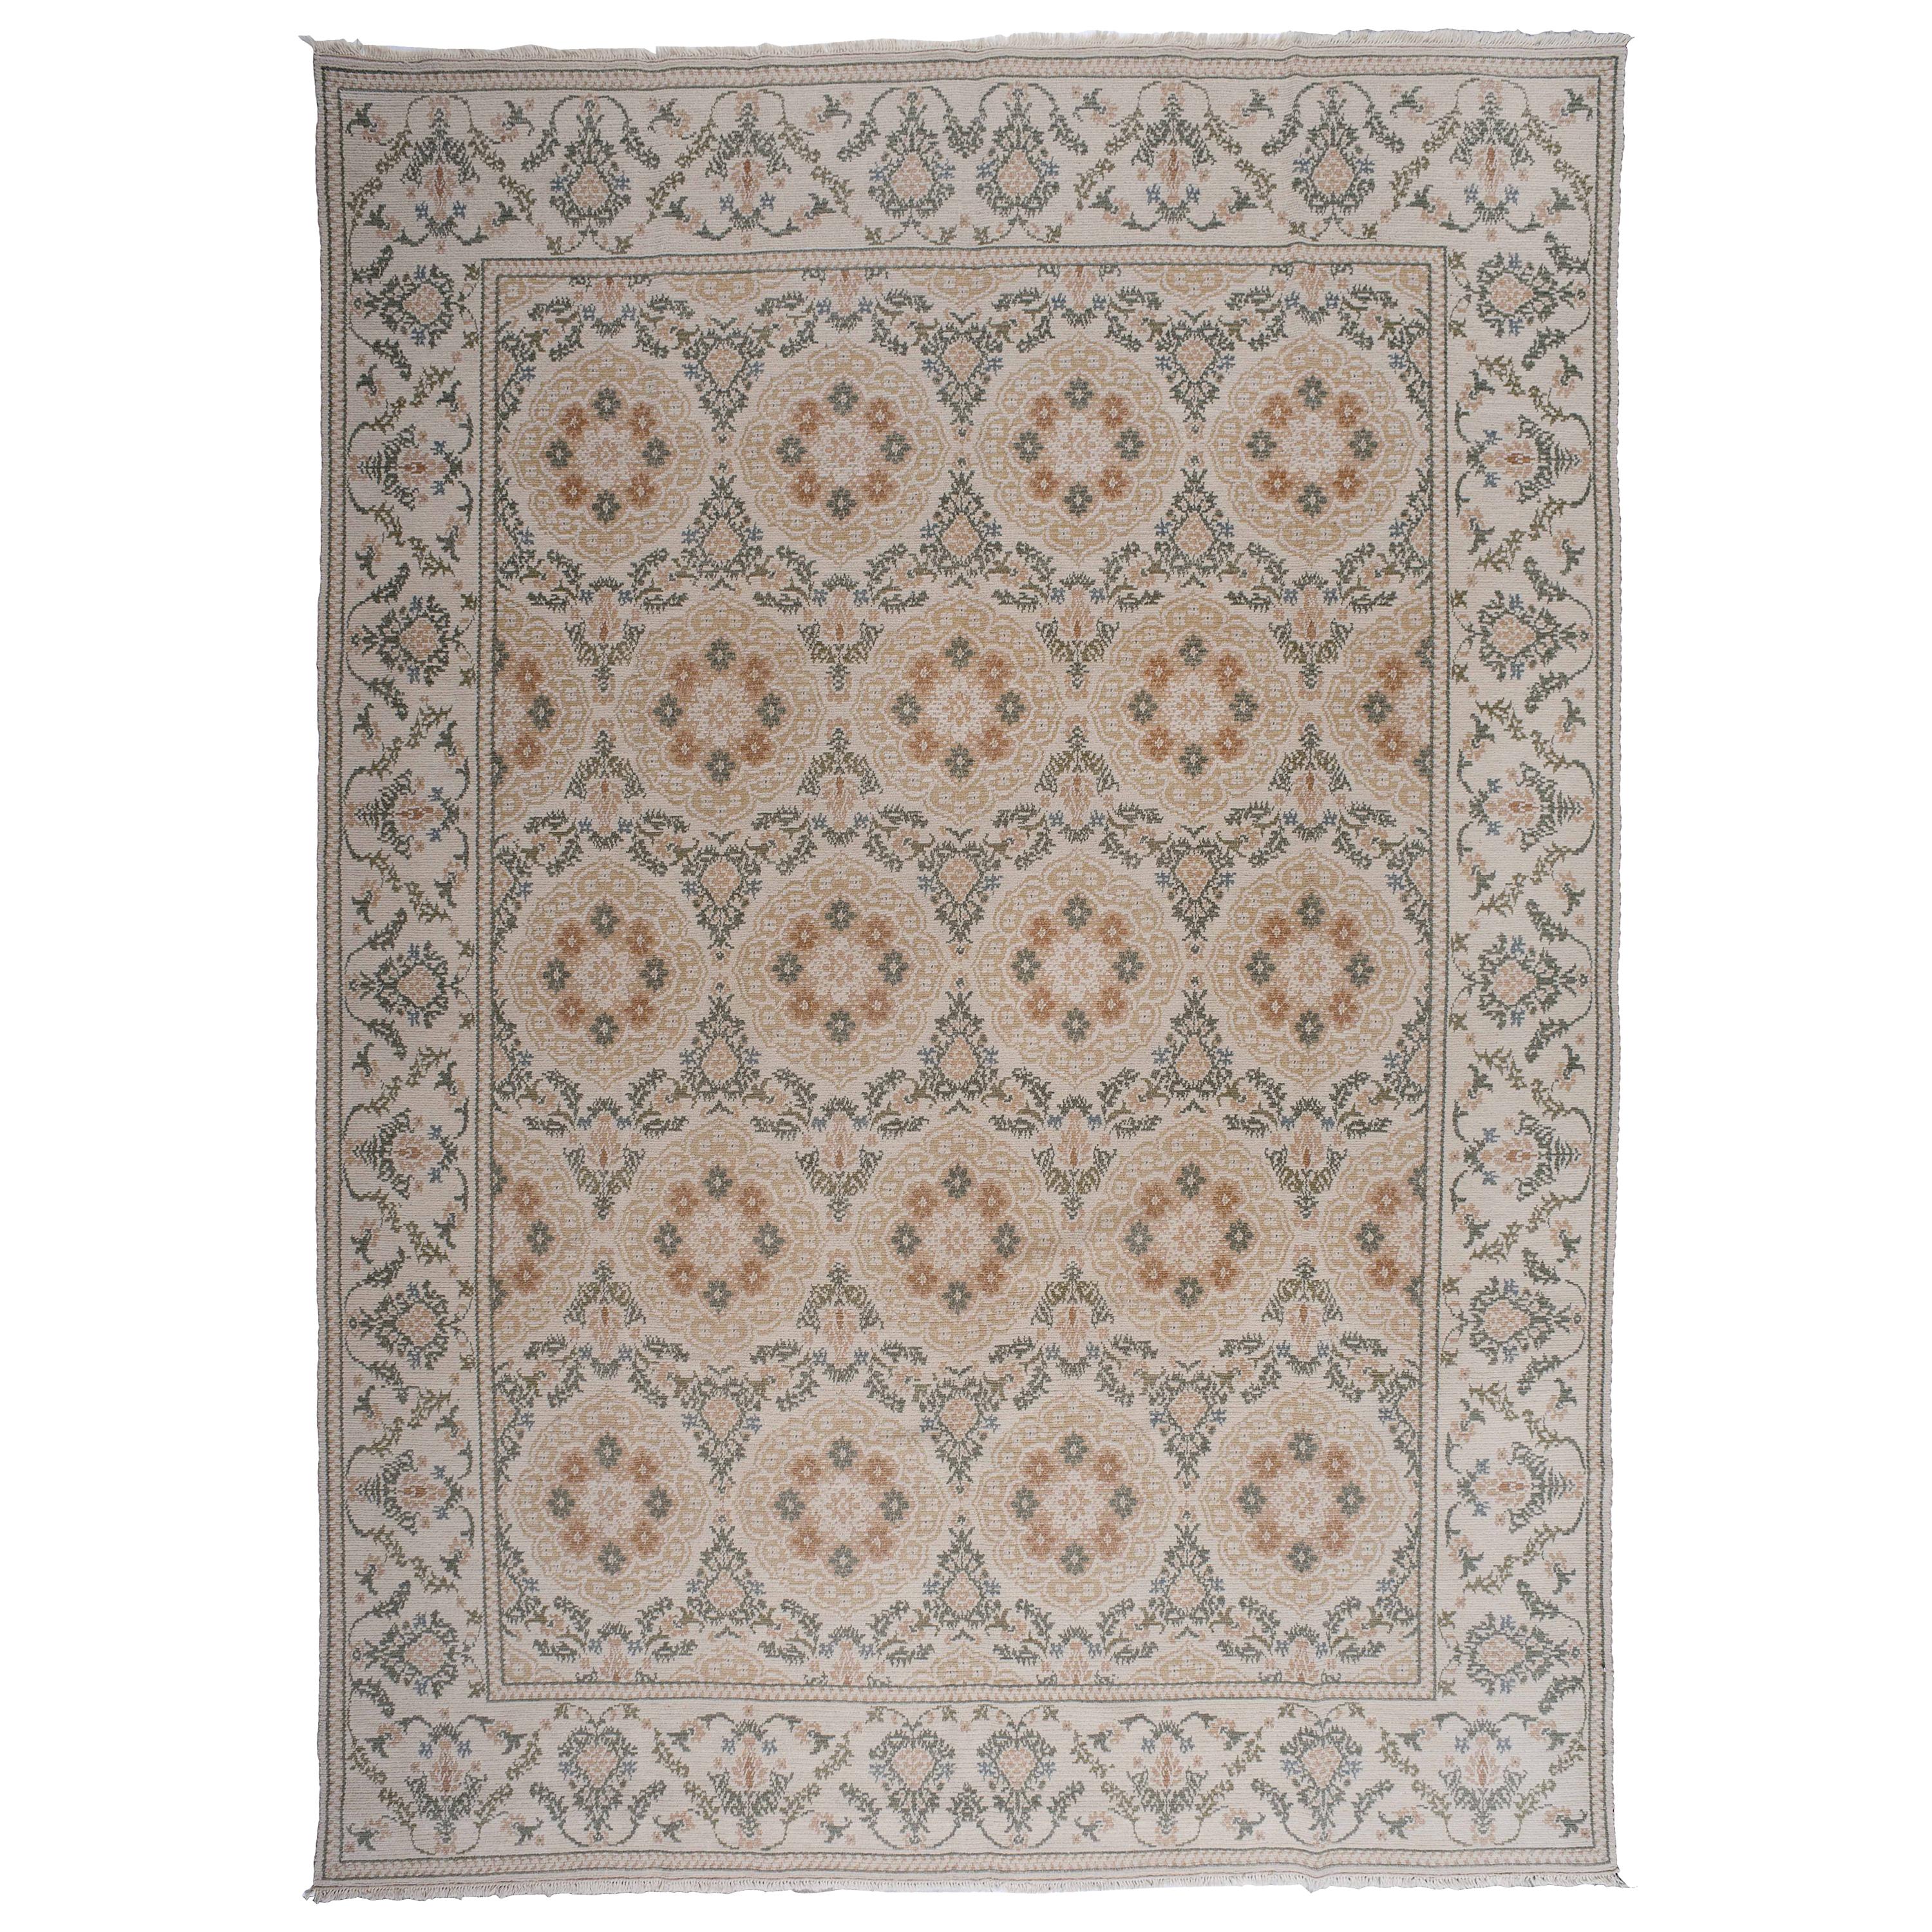 Floral Medallions Rug with Green and Brown